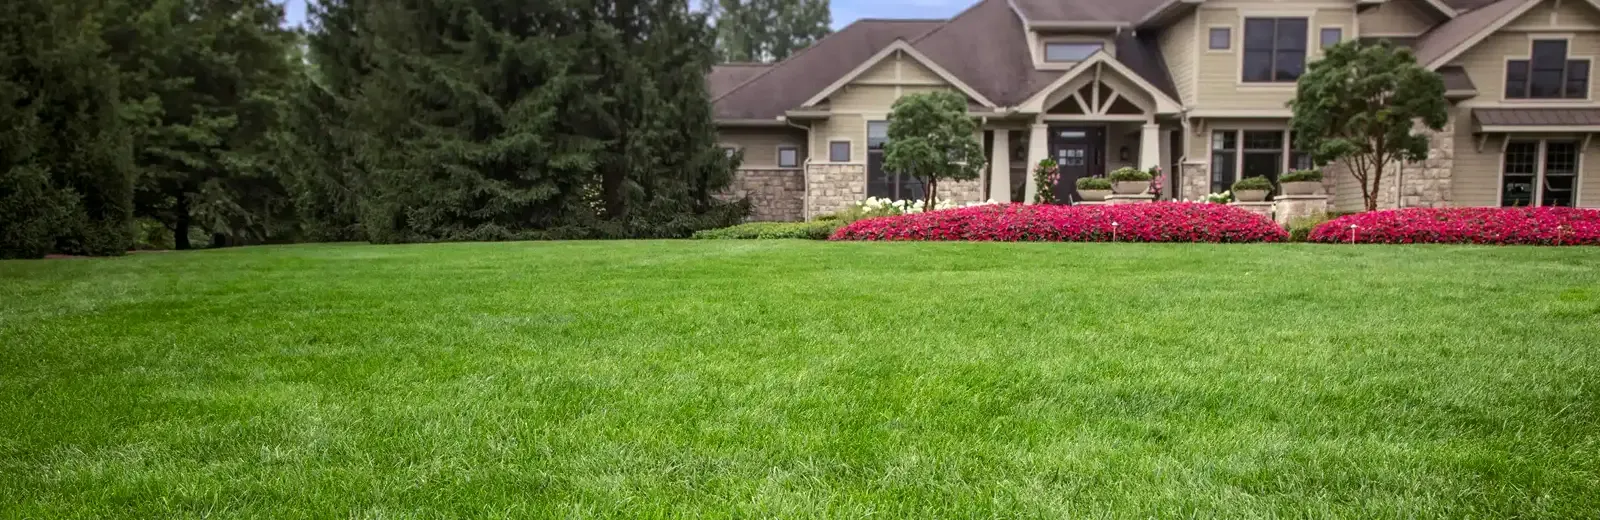 House with green healthy lawn